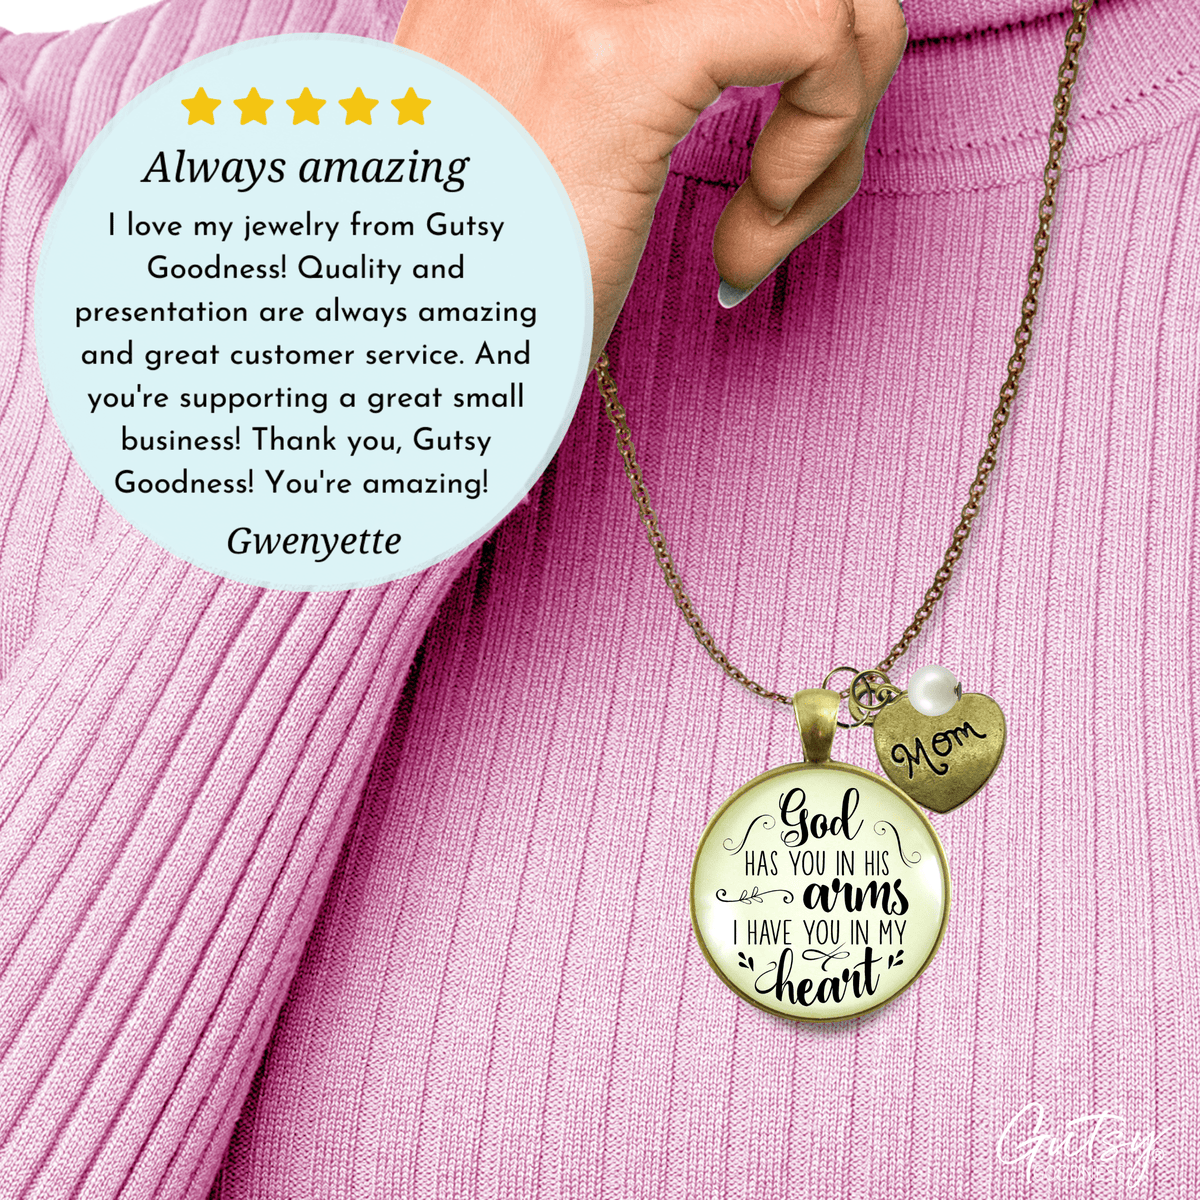 Gutsy Goodness Mom Memorial Necklace God Has You In His Arms Mother Heart Charm Remembrance Gift - Gutsy Goodness;Mom Memorial Necklace God Has You In His Arms Mother Heart Charm Remembrance Gift - Gutsy Goodness Handmade Jewelry Gifts